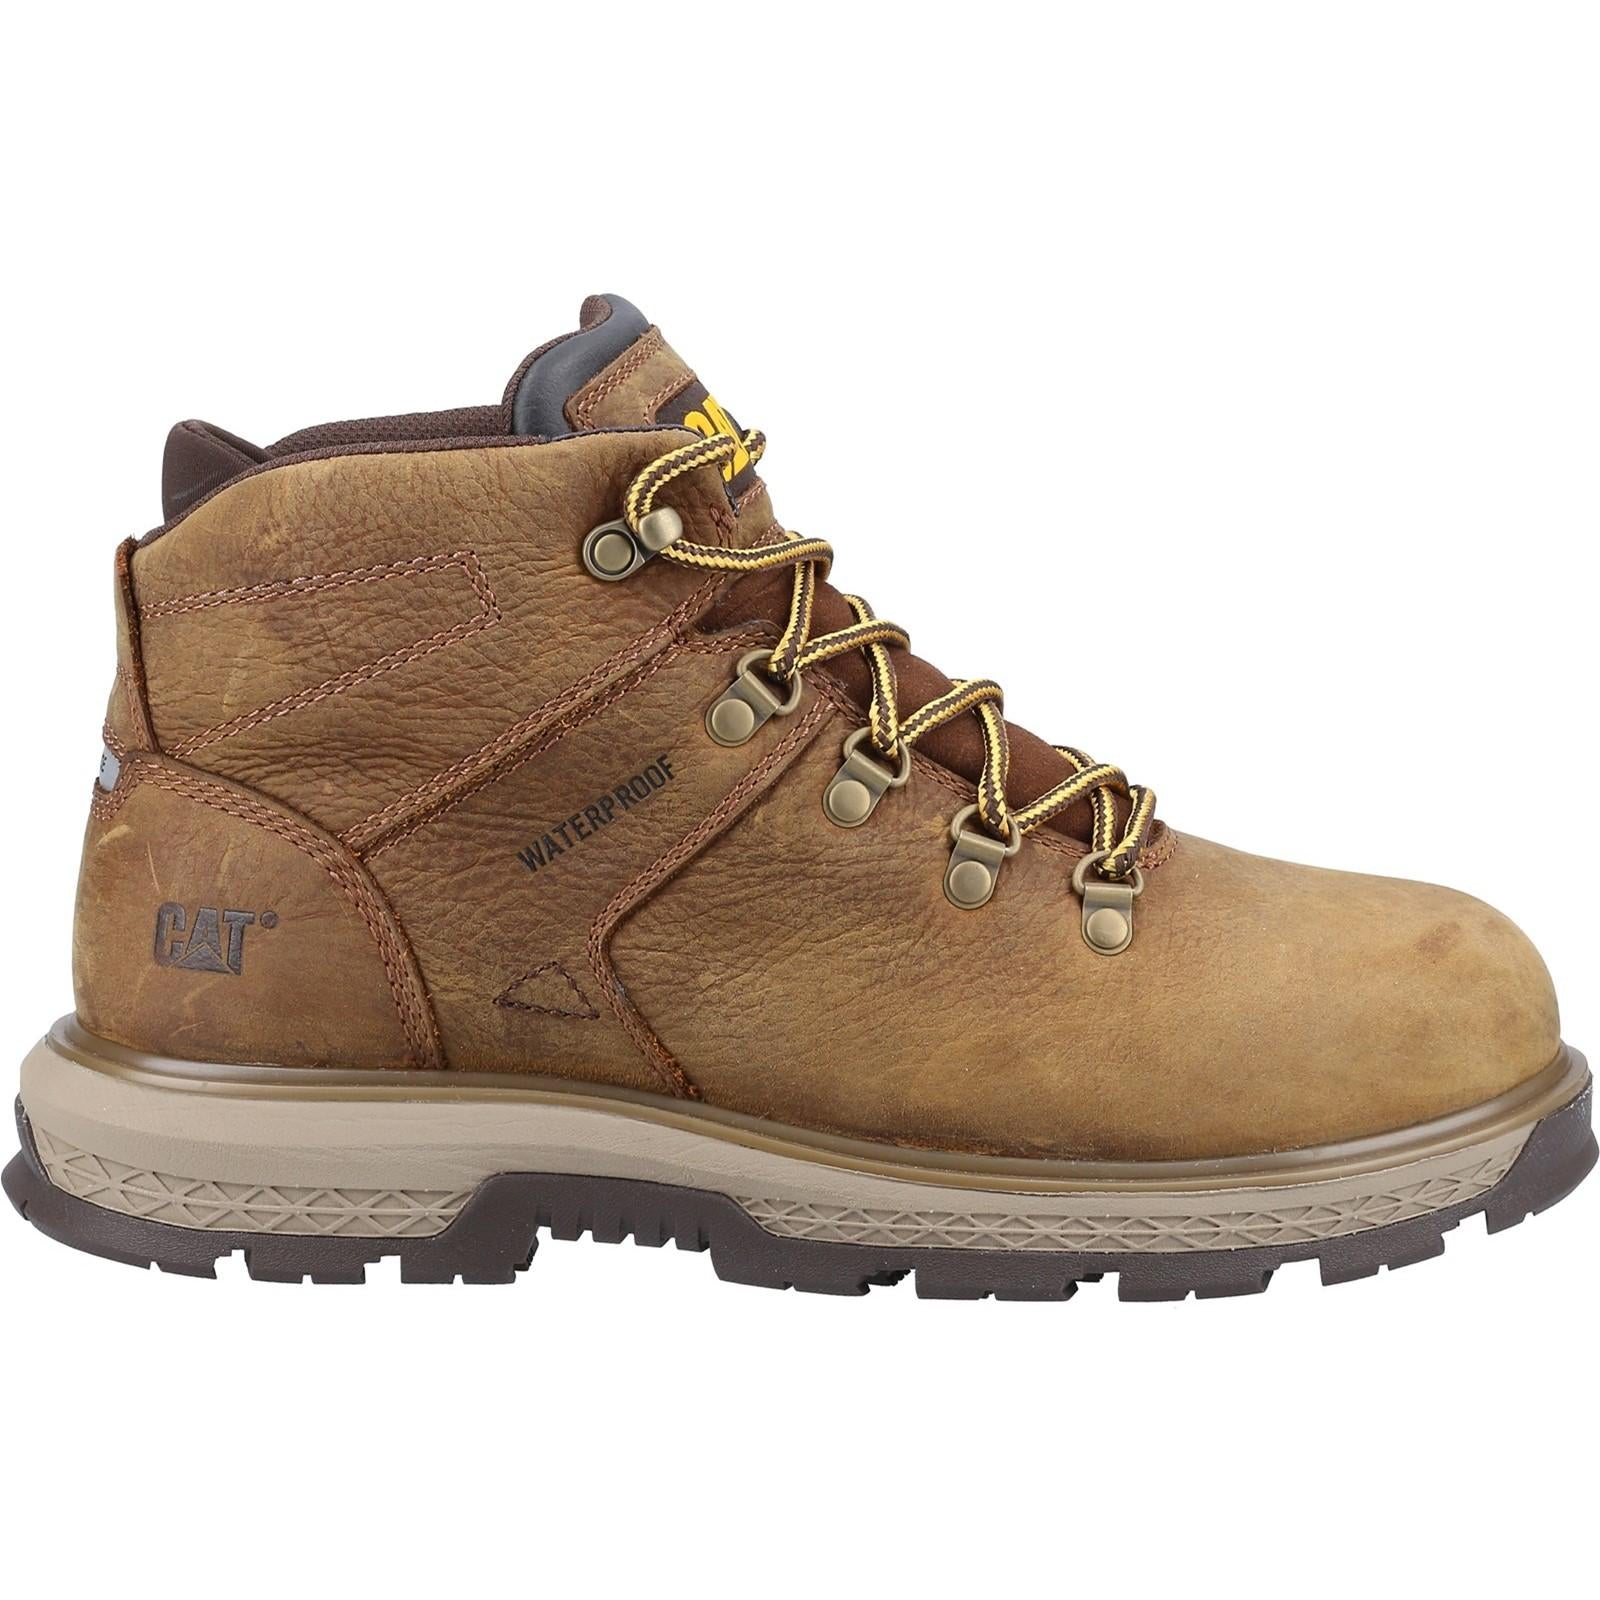 Cat Footwear Exposition Hiker Safety Boot